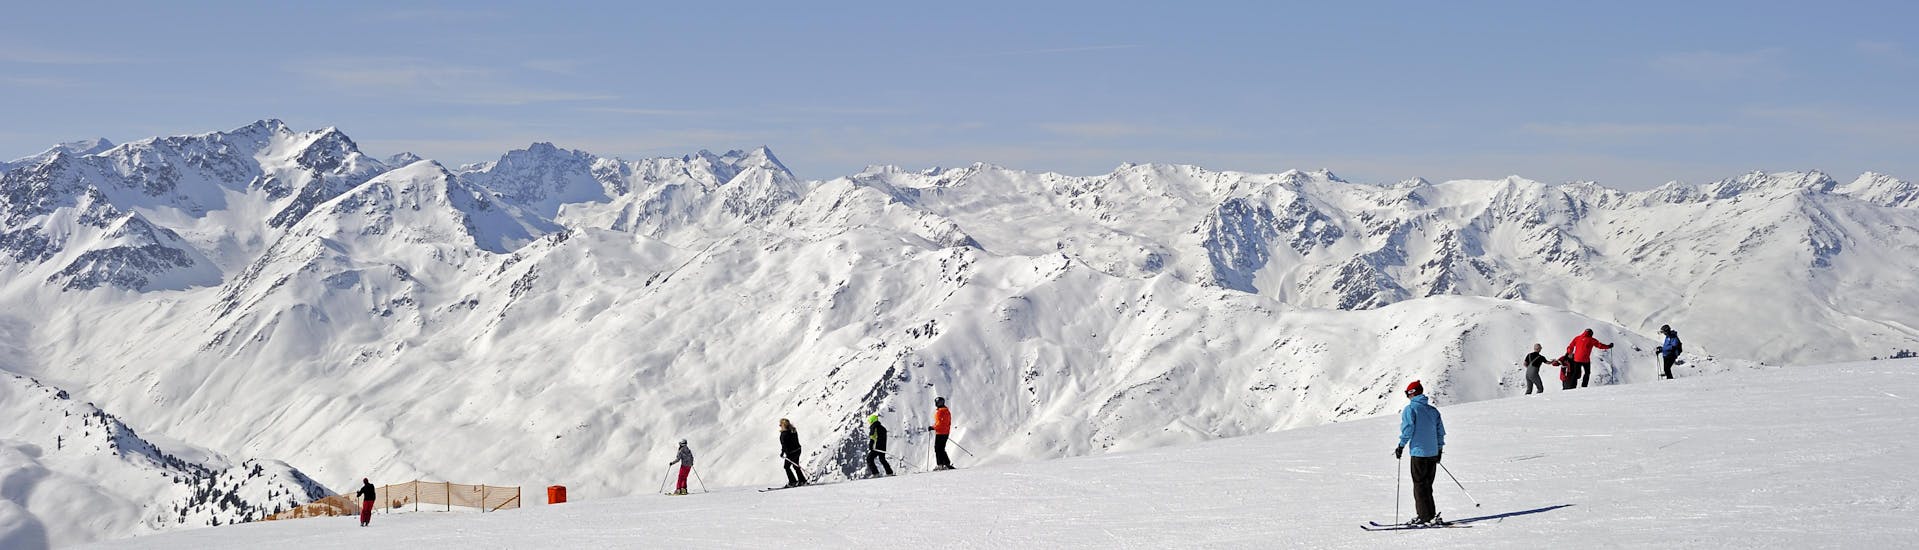 View over the sunny mountain landscape while learning to ski with the ski schools in Axamer Lizum.